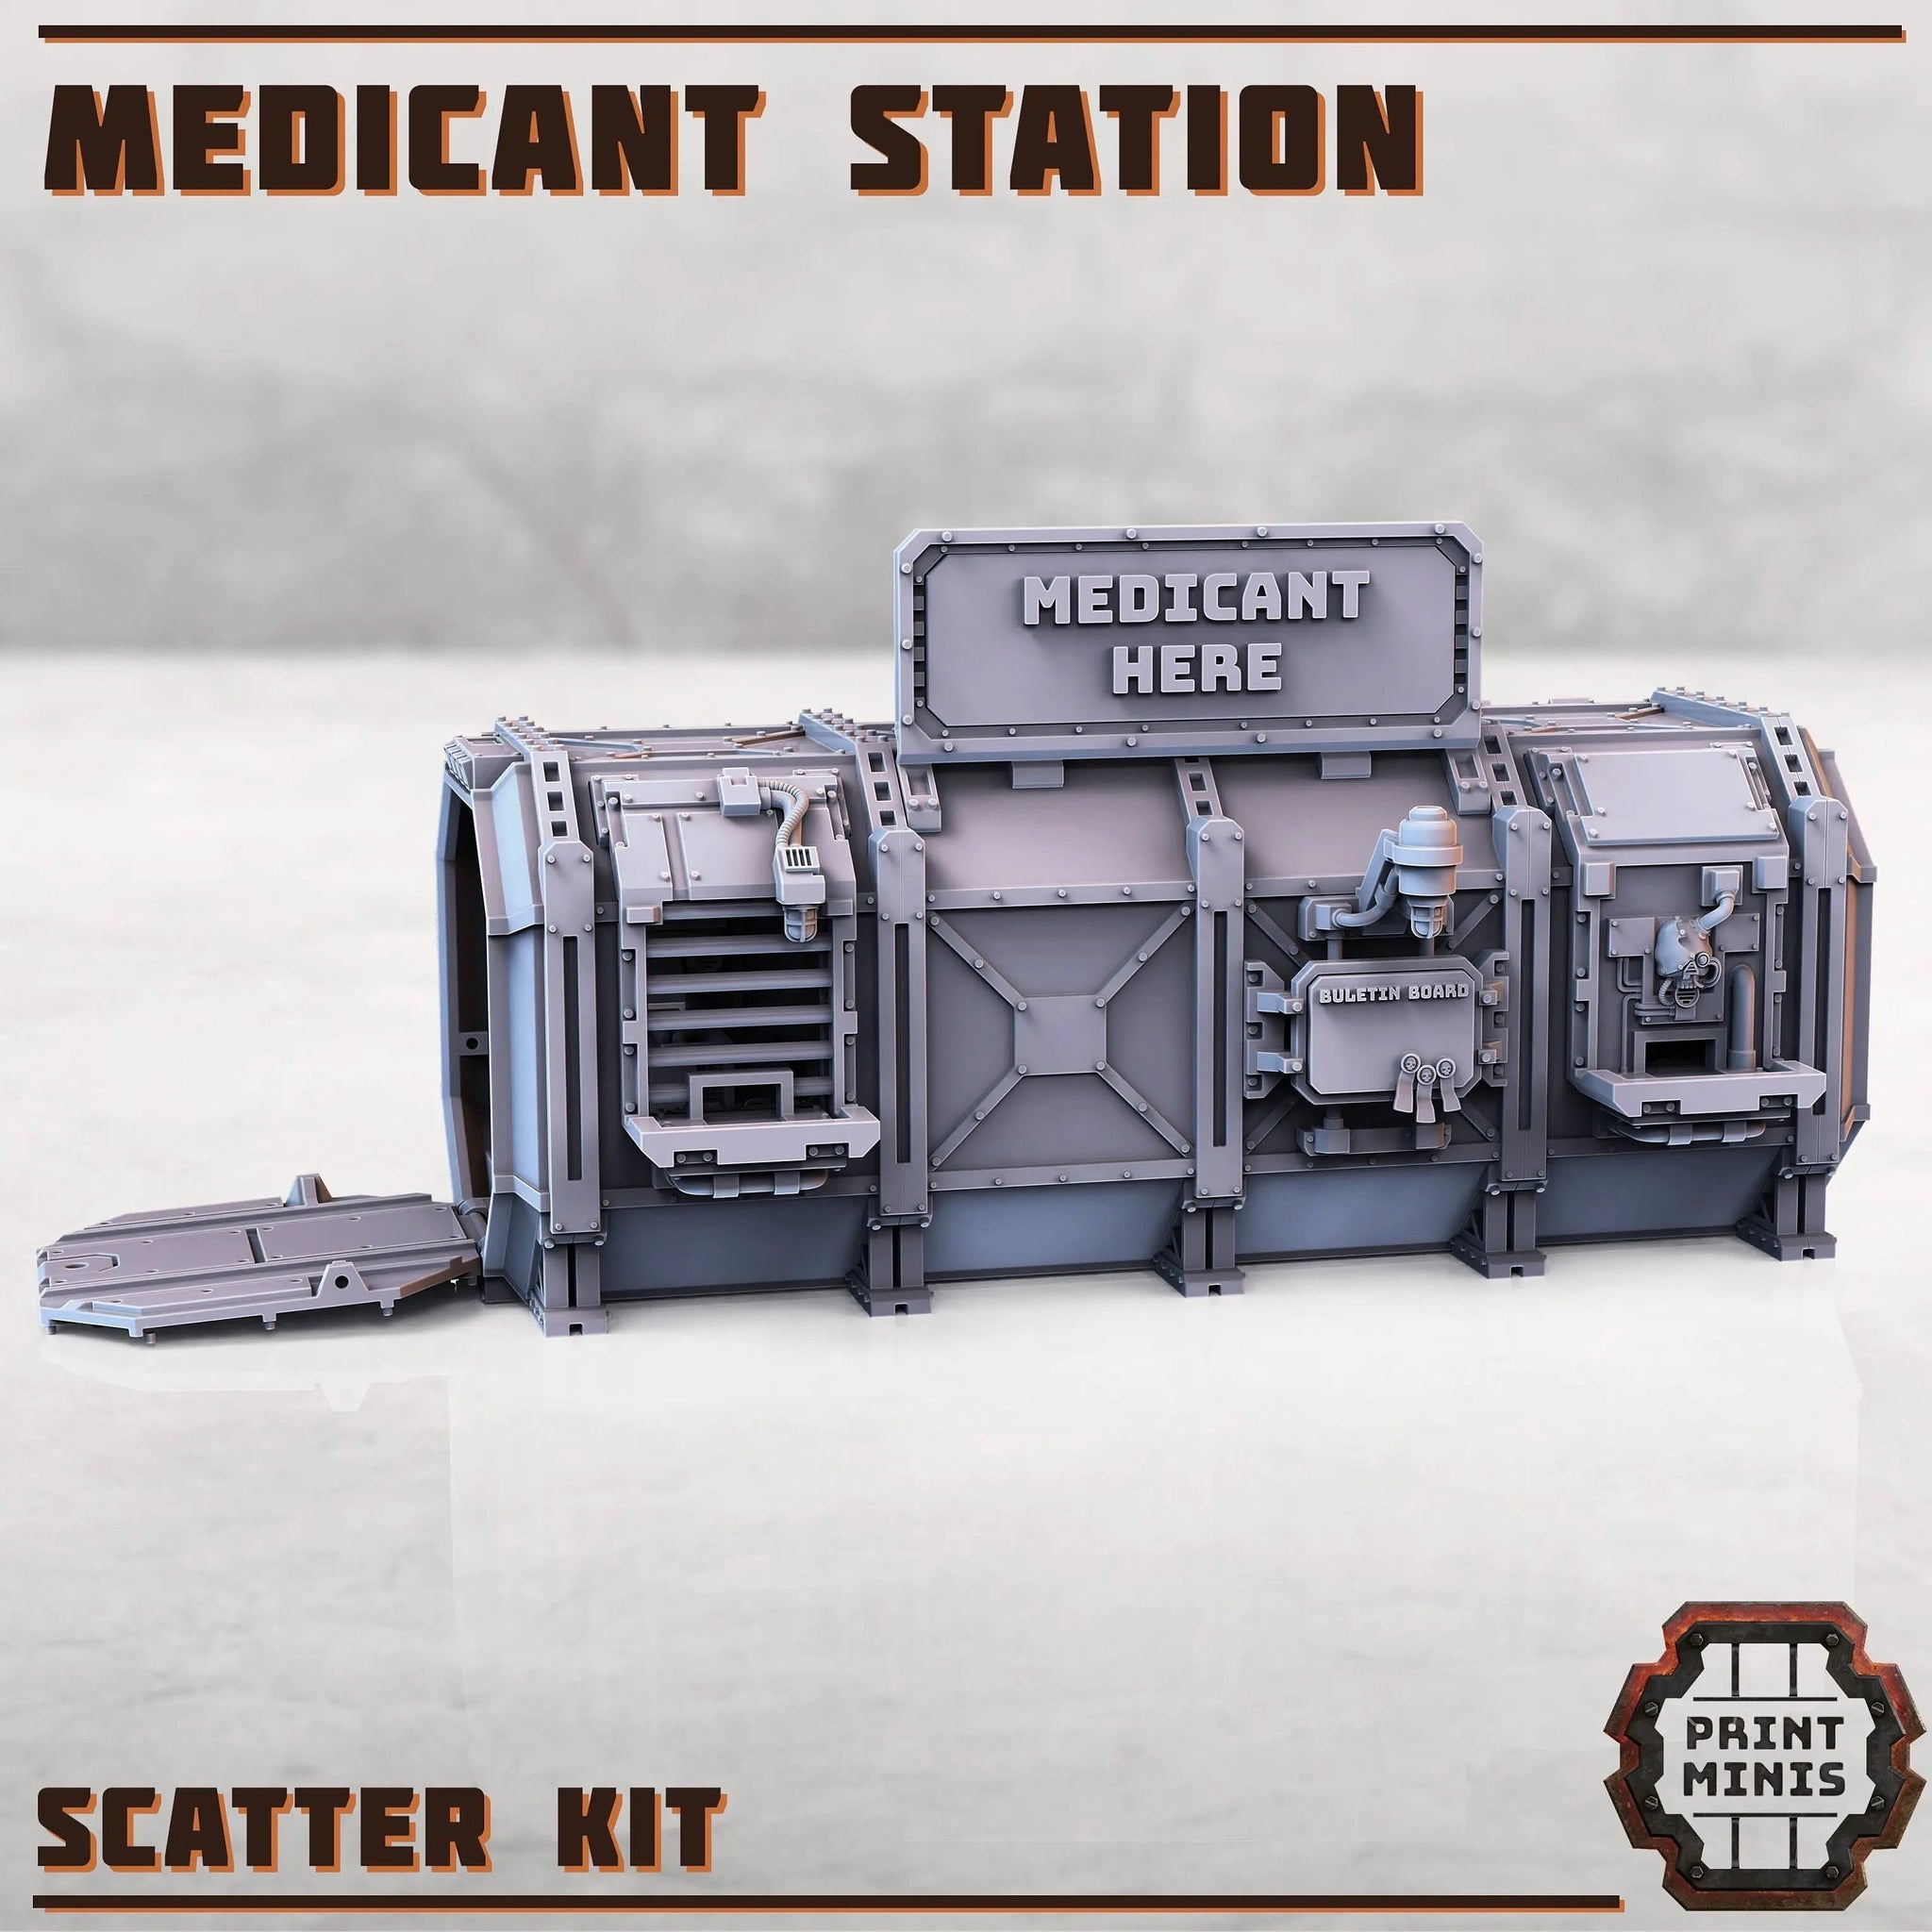 Medicant container Print Minis